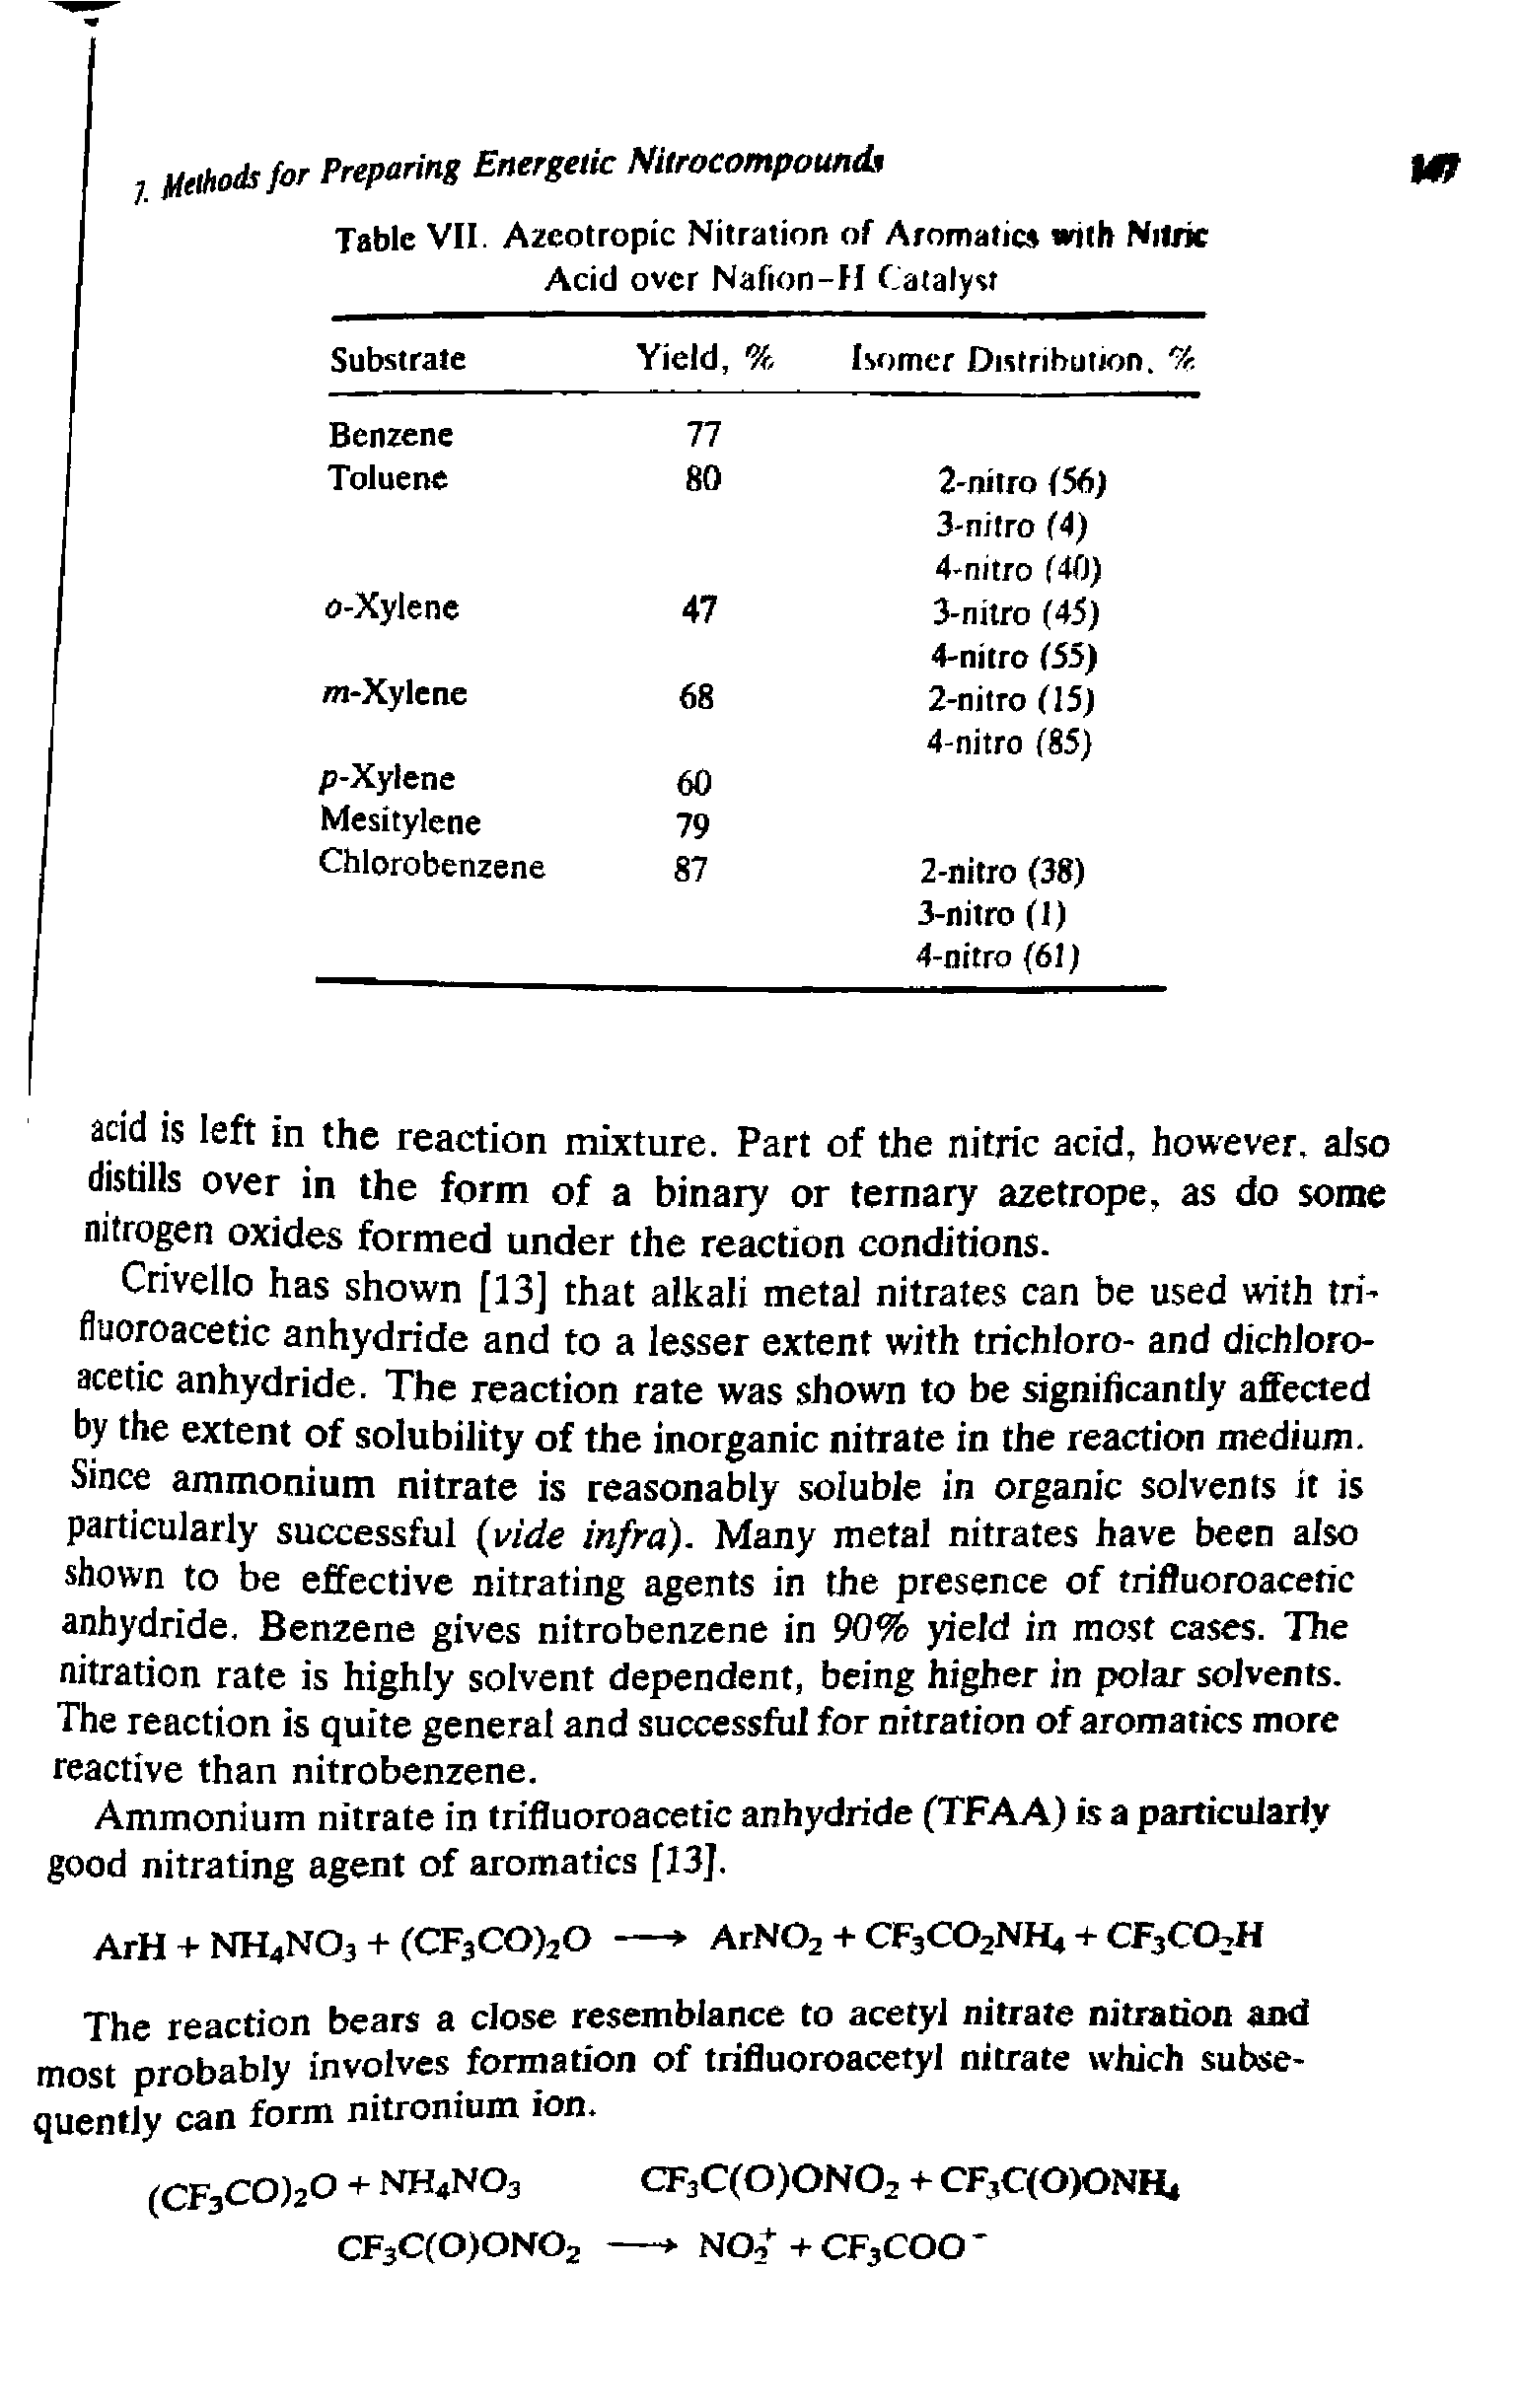 Table VII. Azeotropic Nitration of Aromatic with Nilric Acid over Nafion-H Catalyst...